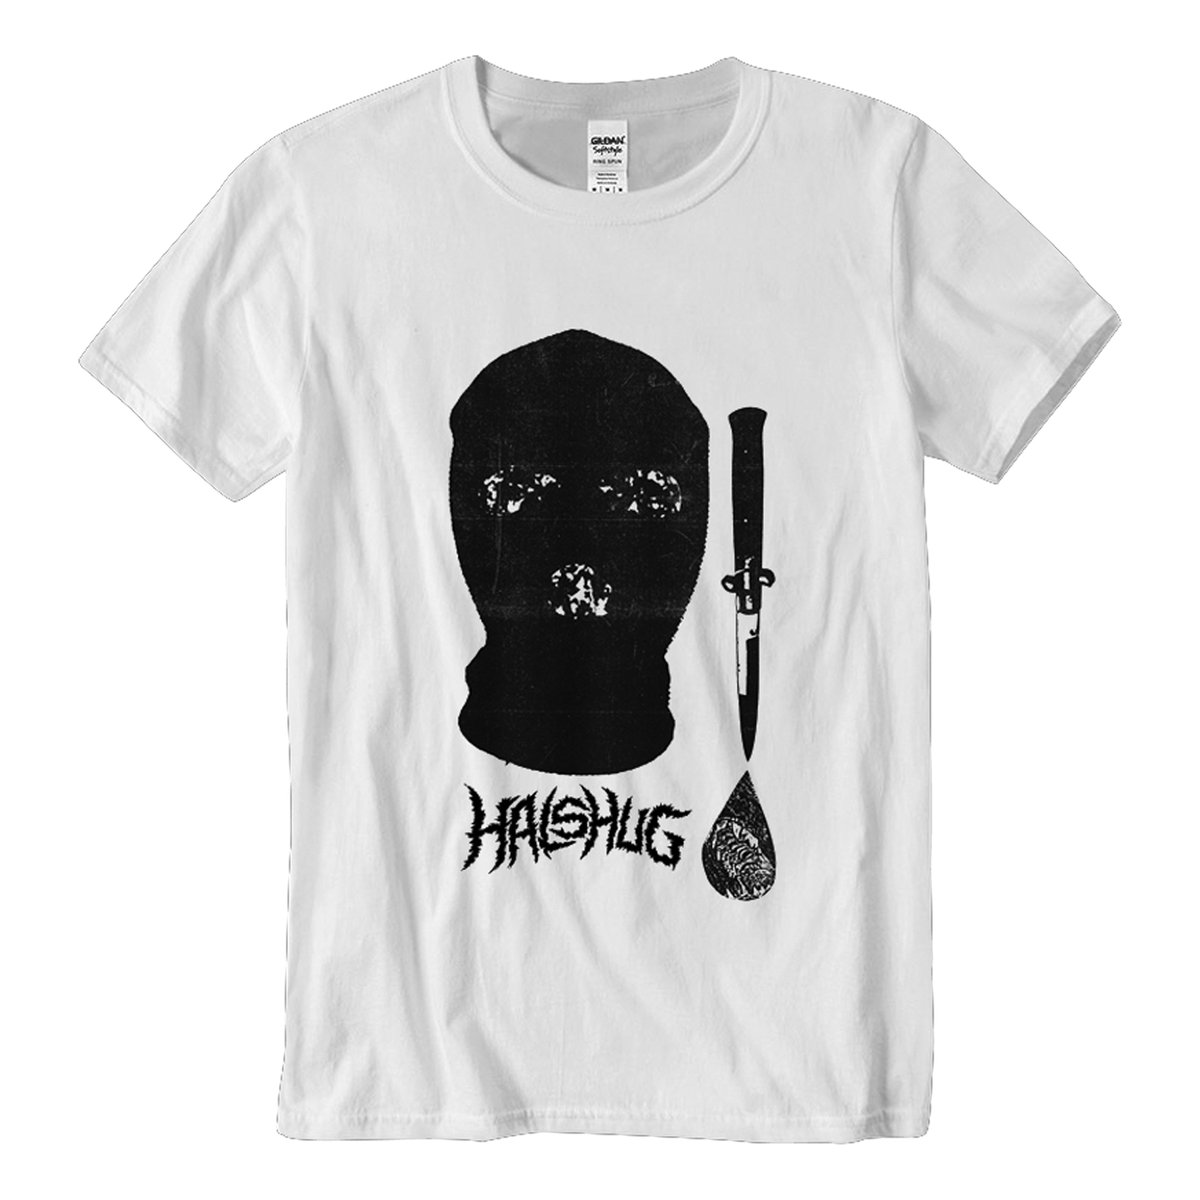 3 Hole Ski Mask Print T Shirt Tees For Men Casual Short Sleeve Tshirt For  Summer Spring Fall Tops As Gifts, 24/7 Customer Service